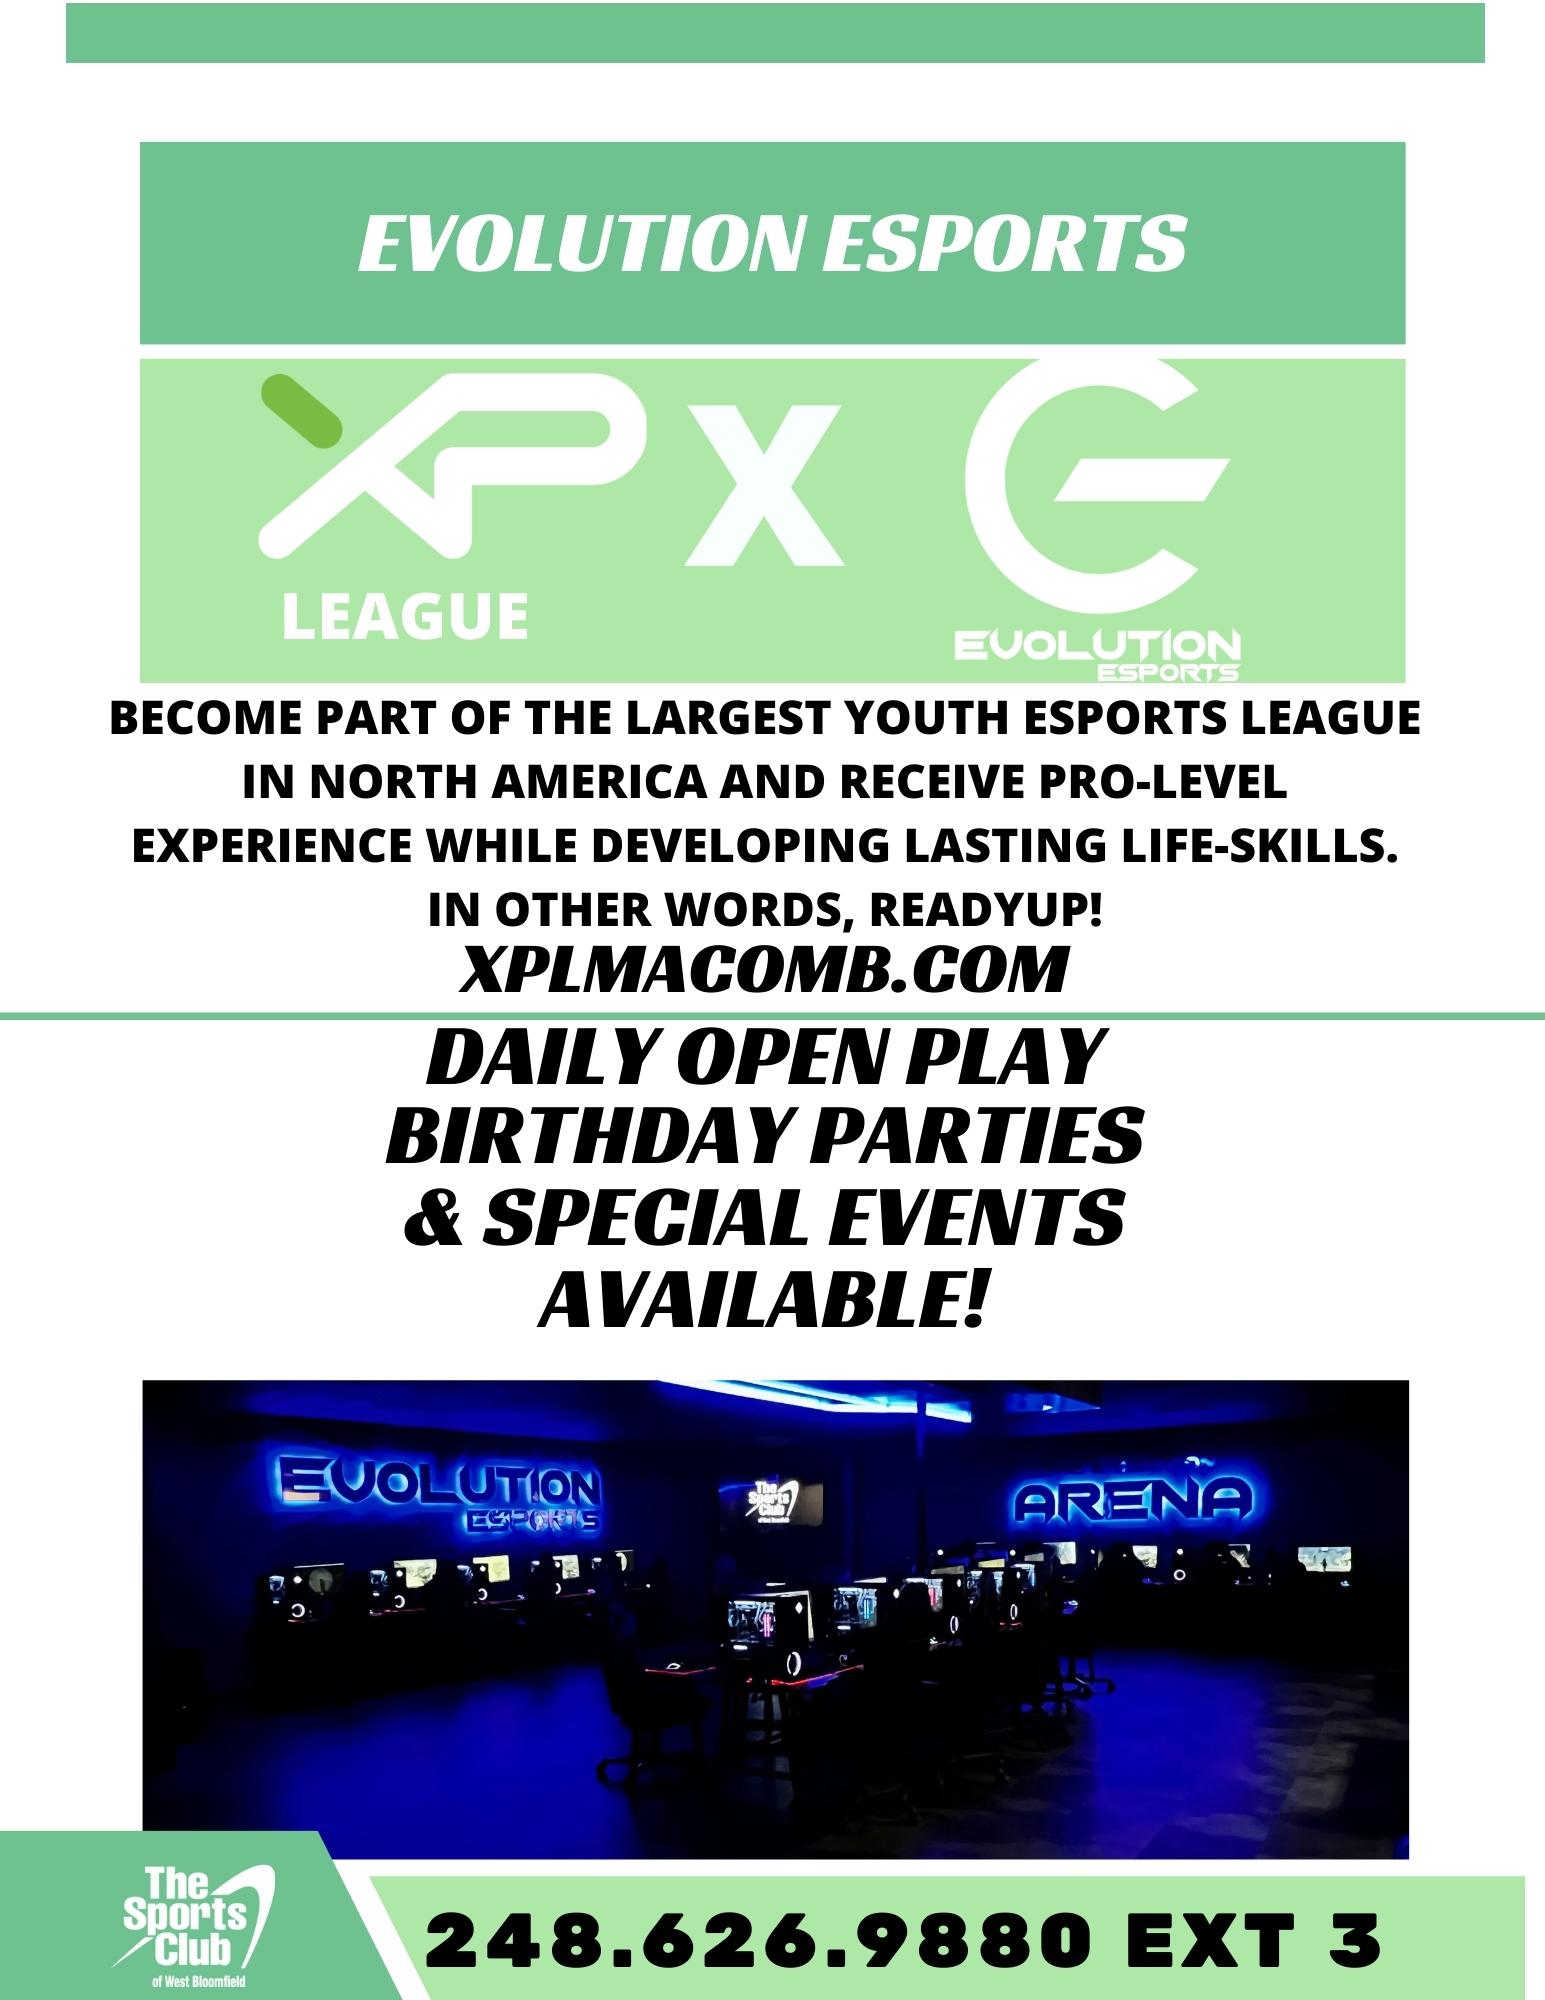 eSports - The Sports Club of West Bloomfield